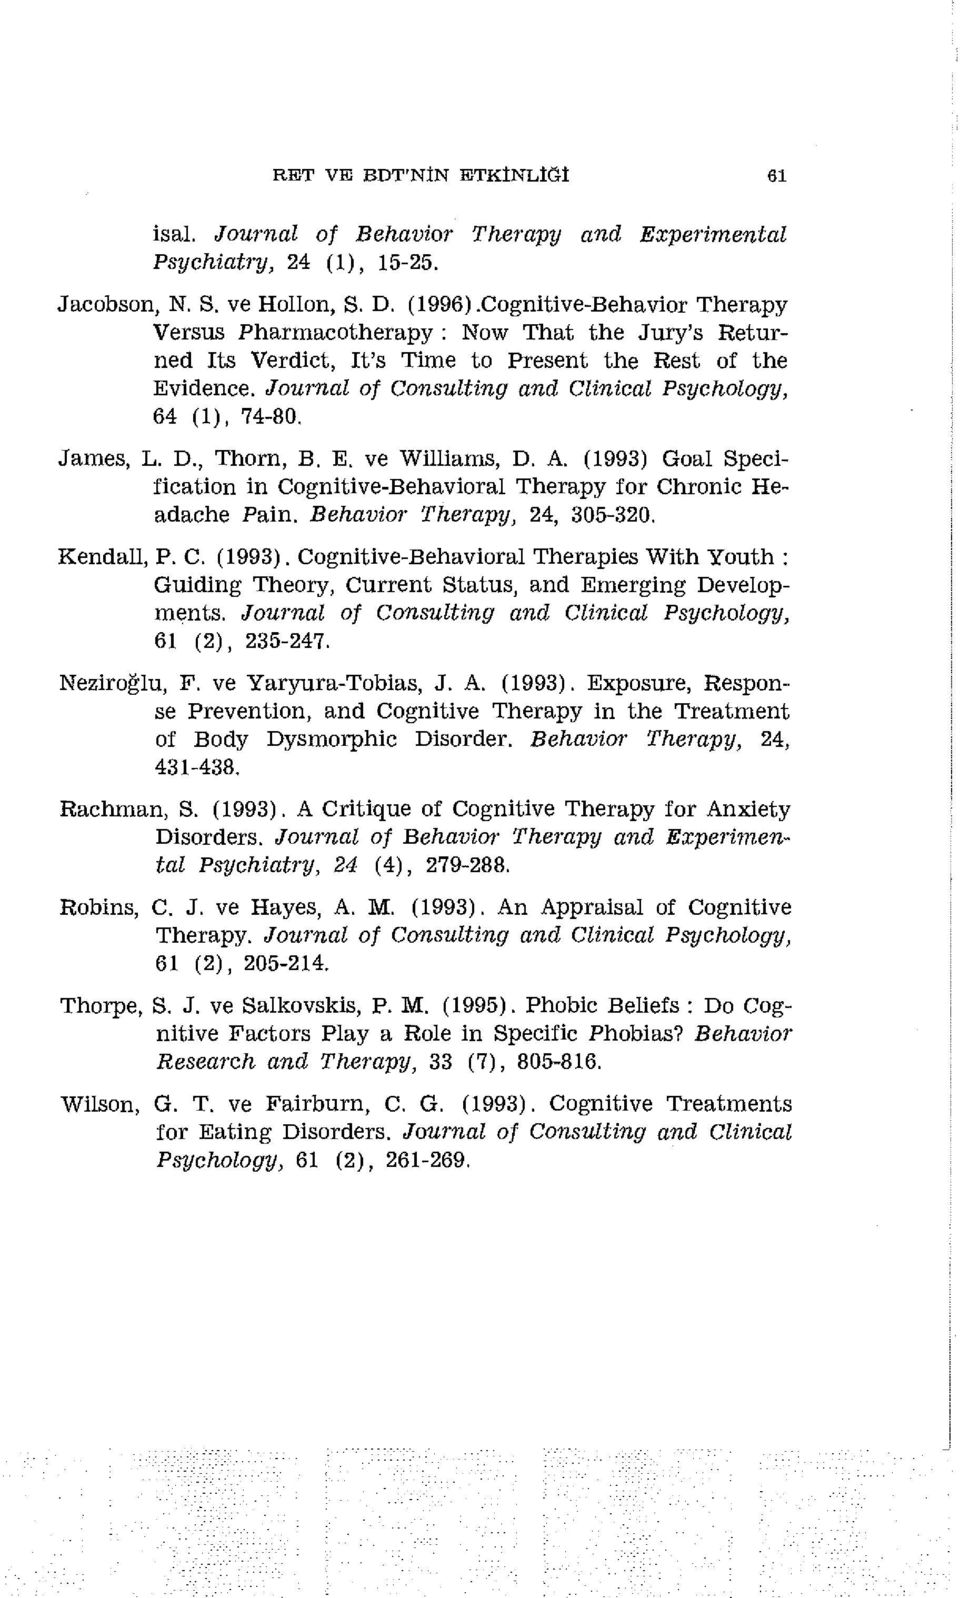 Journal of Consulting and Clinical Psychology, 64 (1), 74-80. James, L. D., Thorn, B. E. ve Williams, D. A. (1993) Goal Specification in Cognitive-Behavioral Therapy for Chronic Headache Pain.